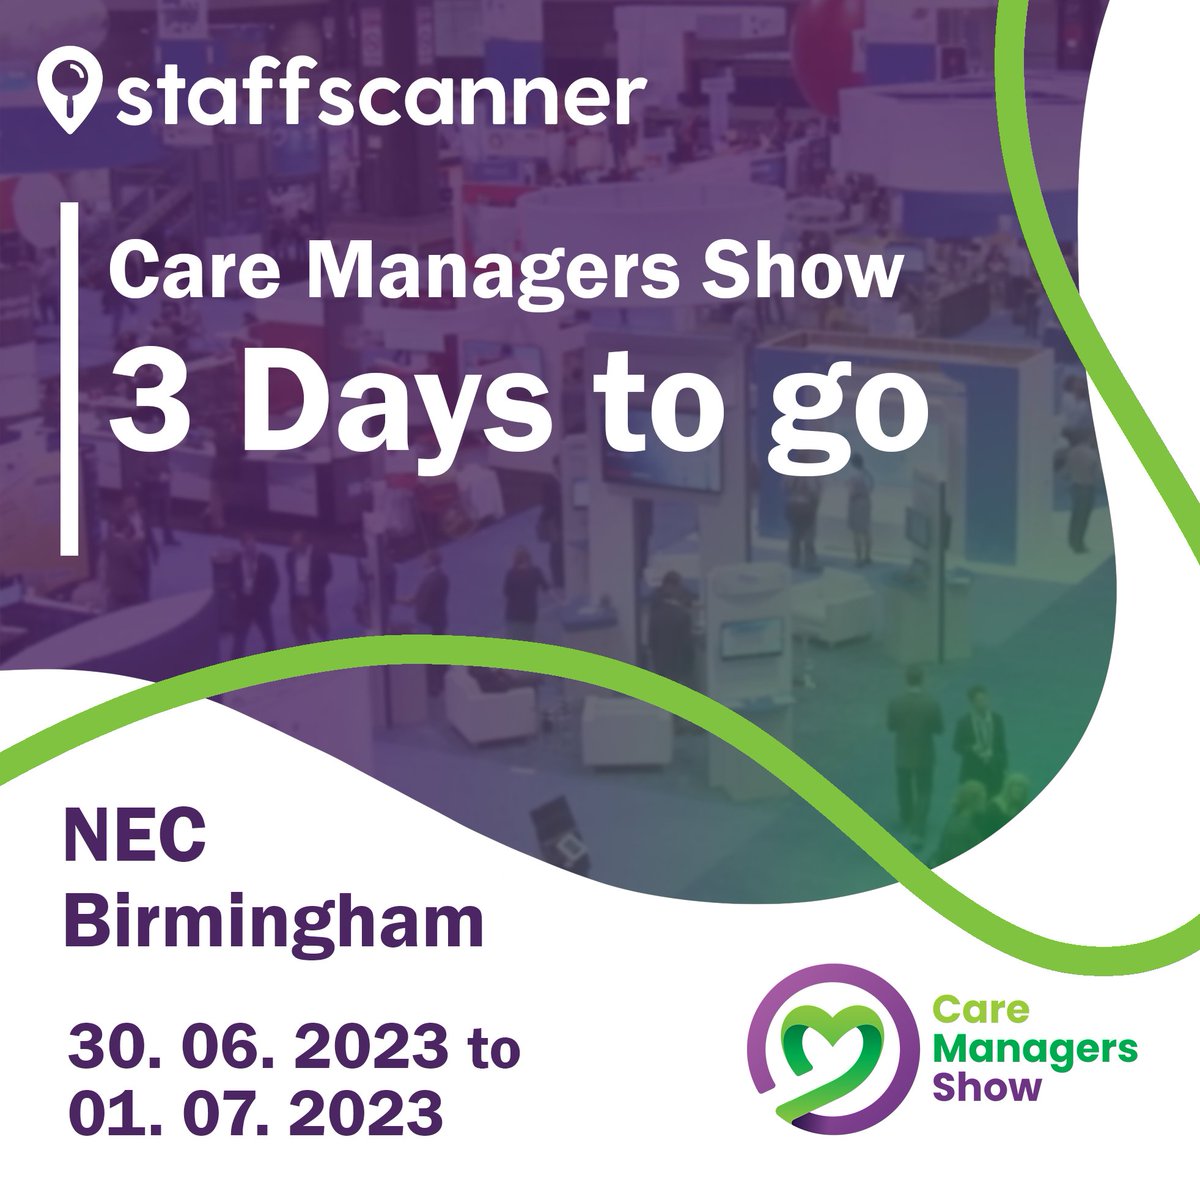 We are attending the Care Managers Show at @thenec  from 30th June to 1st July 2023!

staffscanner.co.uk
#carehomesuk #caregroups #connection #communication #hiring #NHS #job #care #jobfair #experience #careexperience #jobcentre #fair